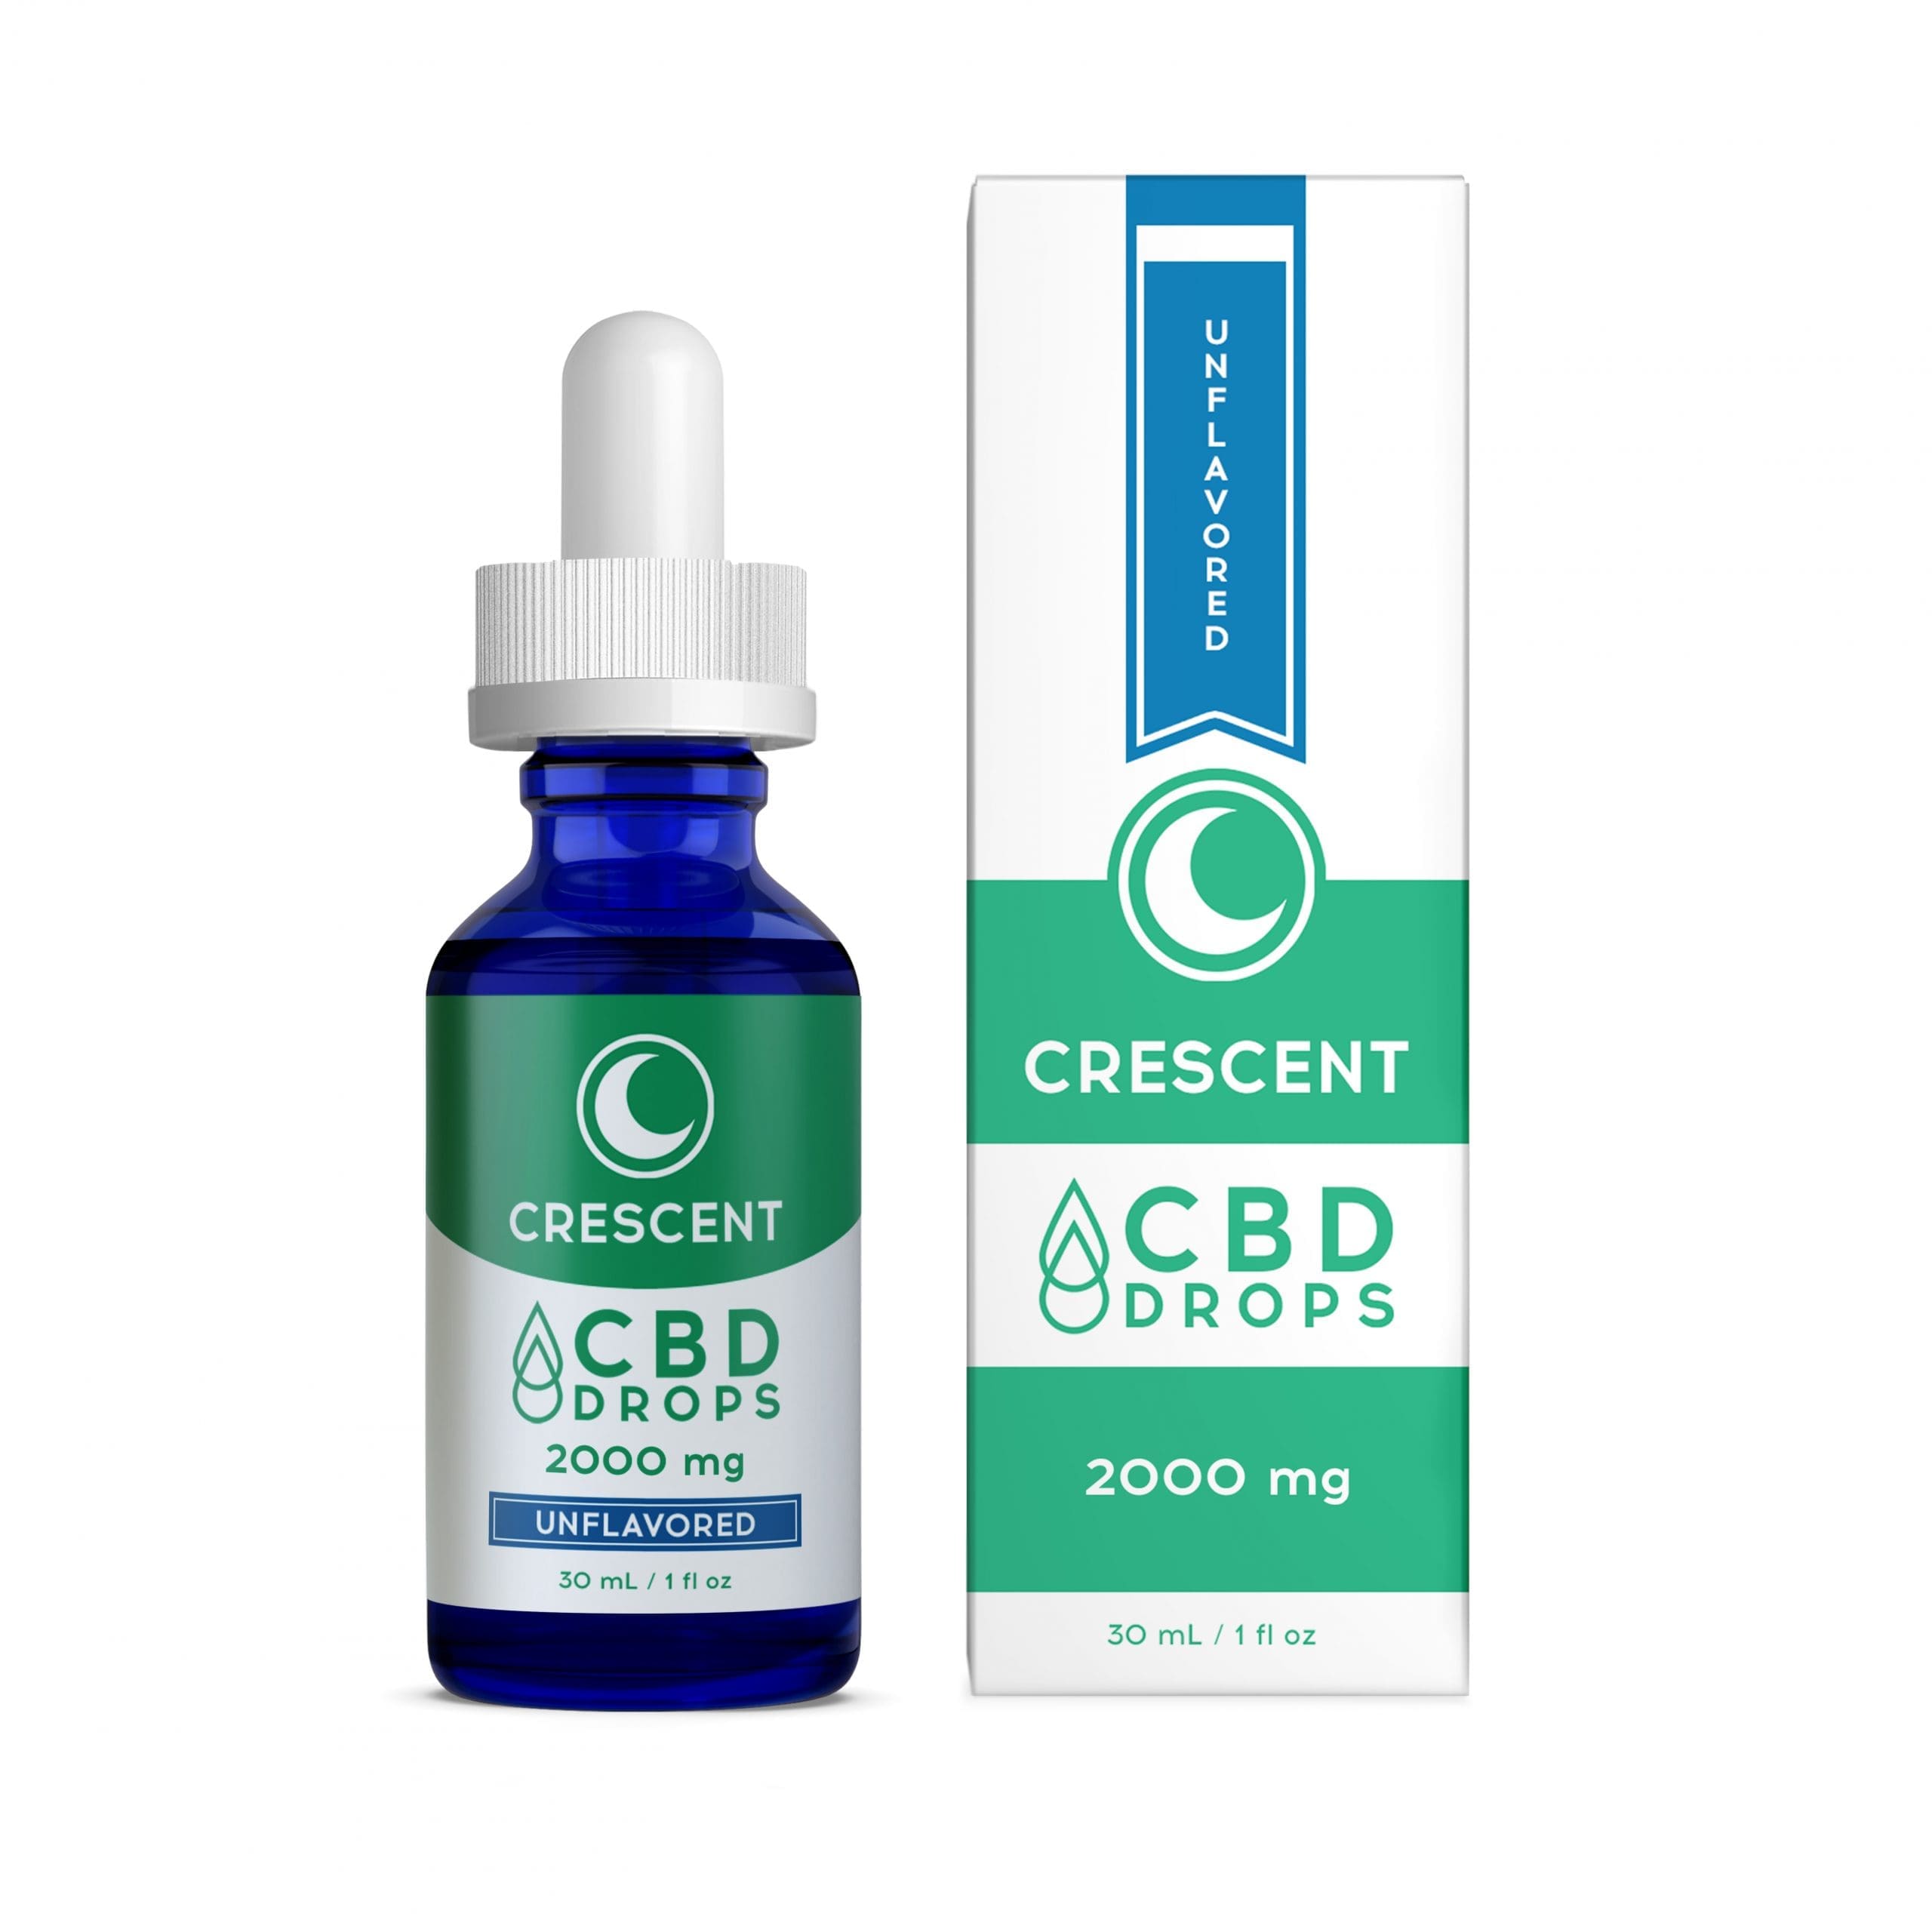 2000mg UNFLAVORED cbd oil and box